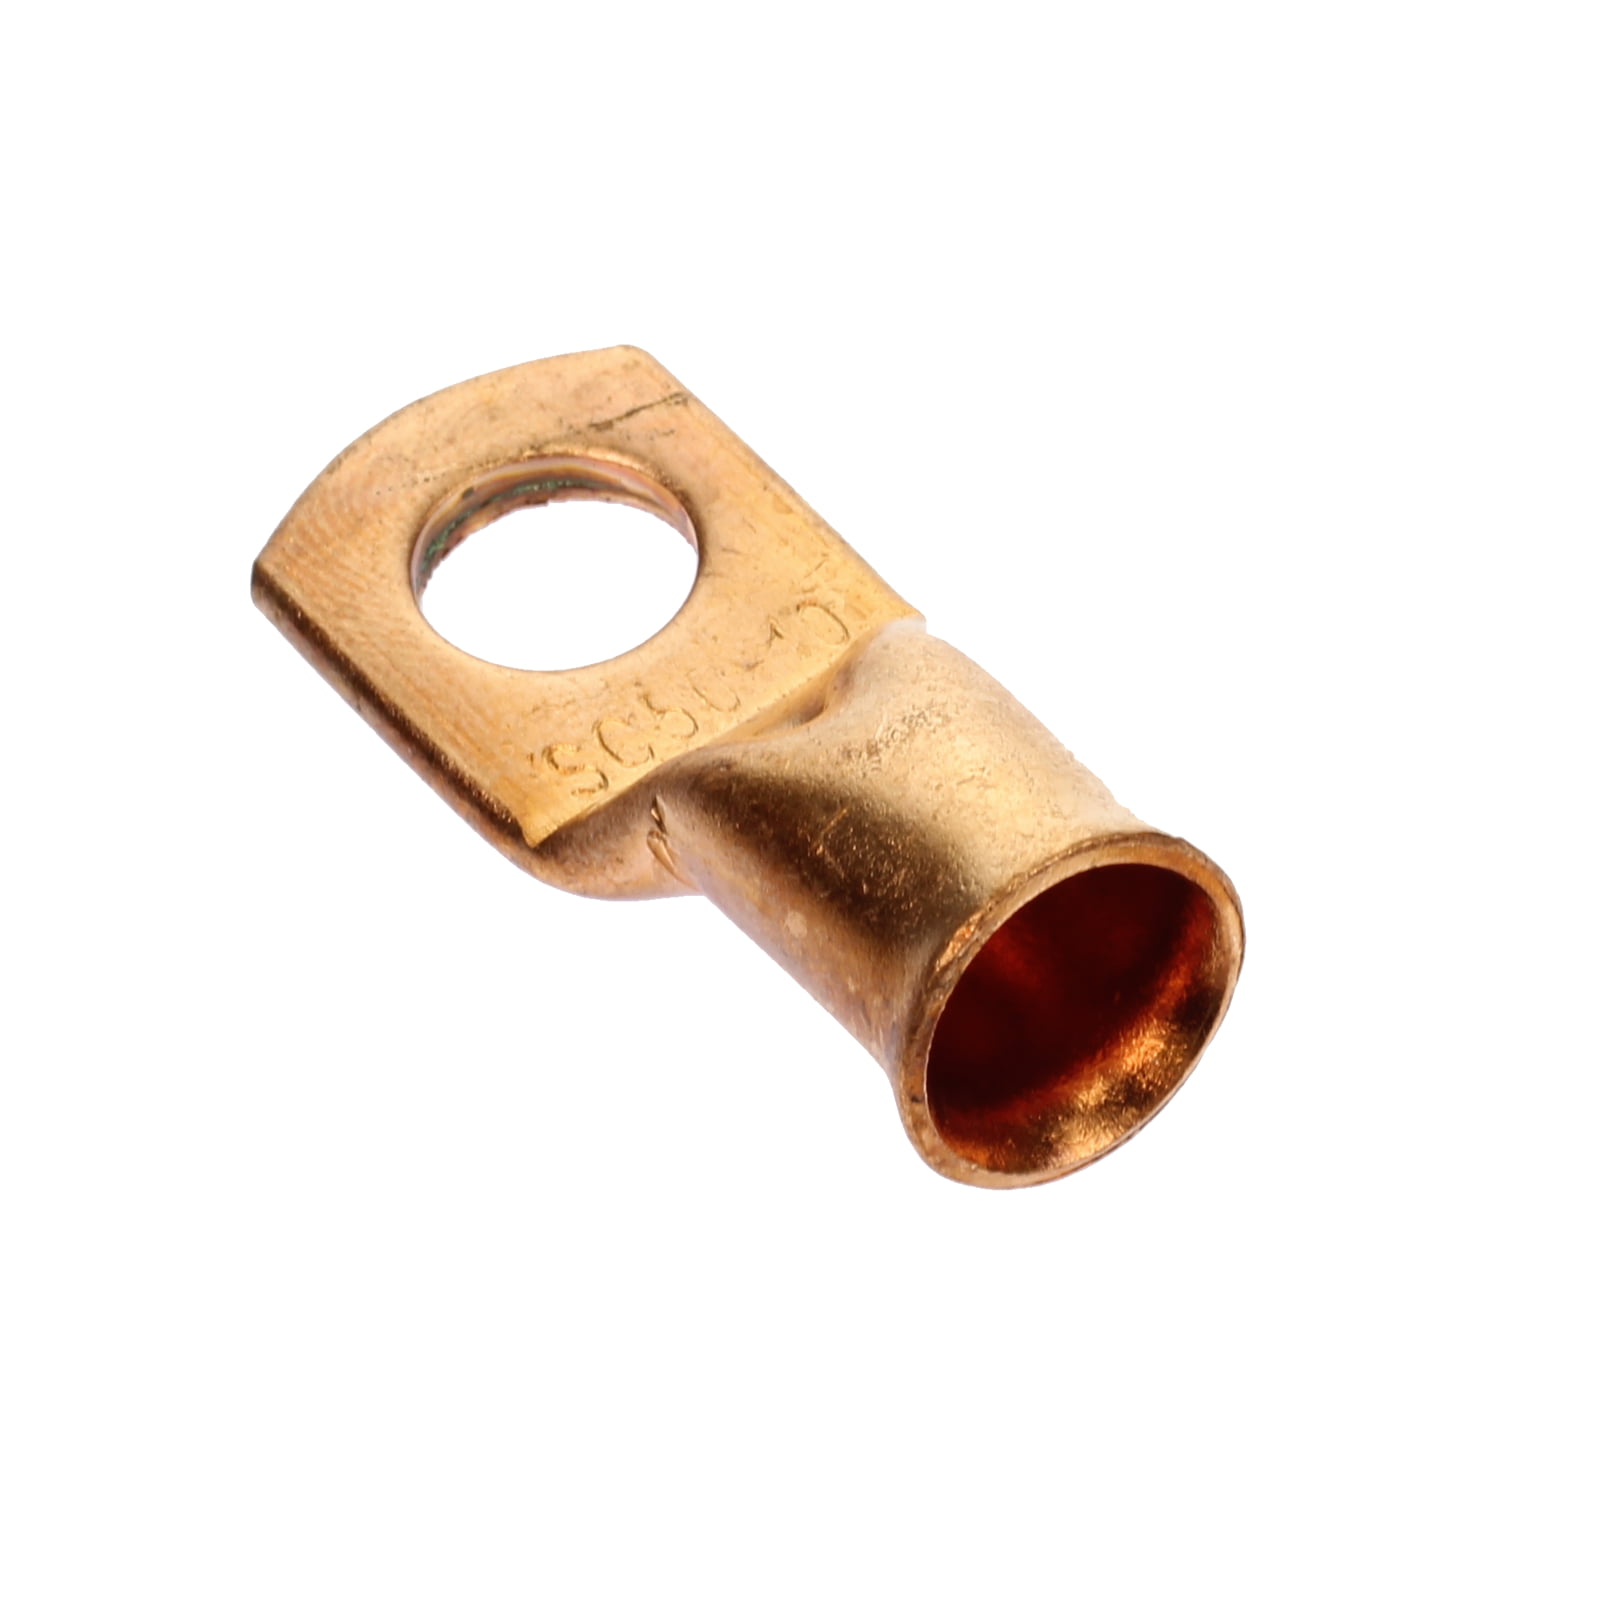 8 Wire Ring Terminal Copper 4 AWG Gauge 1/4" Connectors Car Audio Terminals 